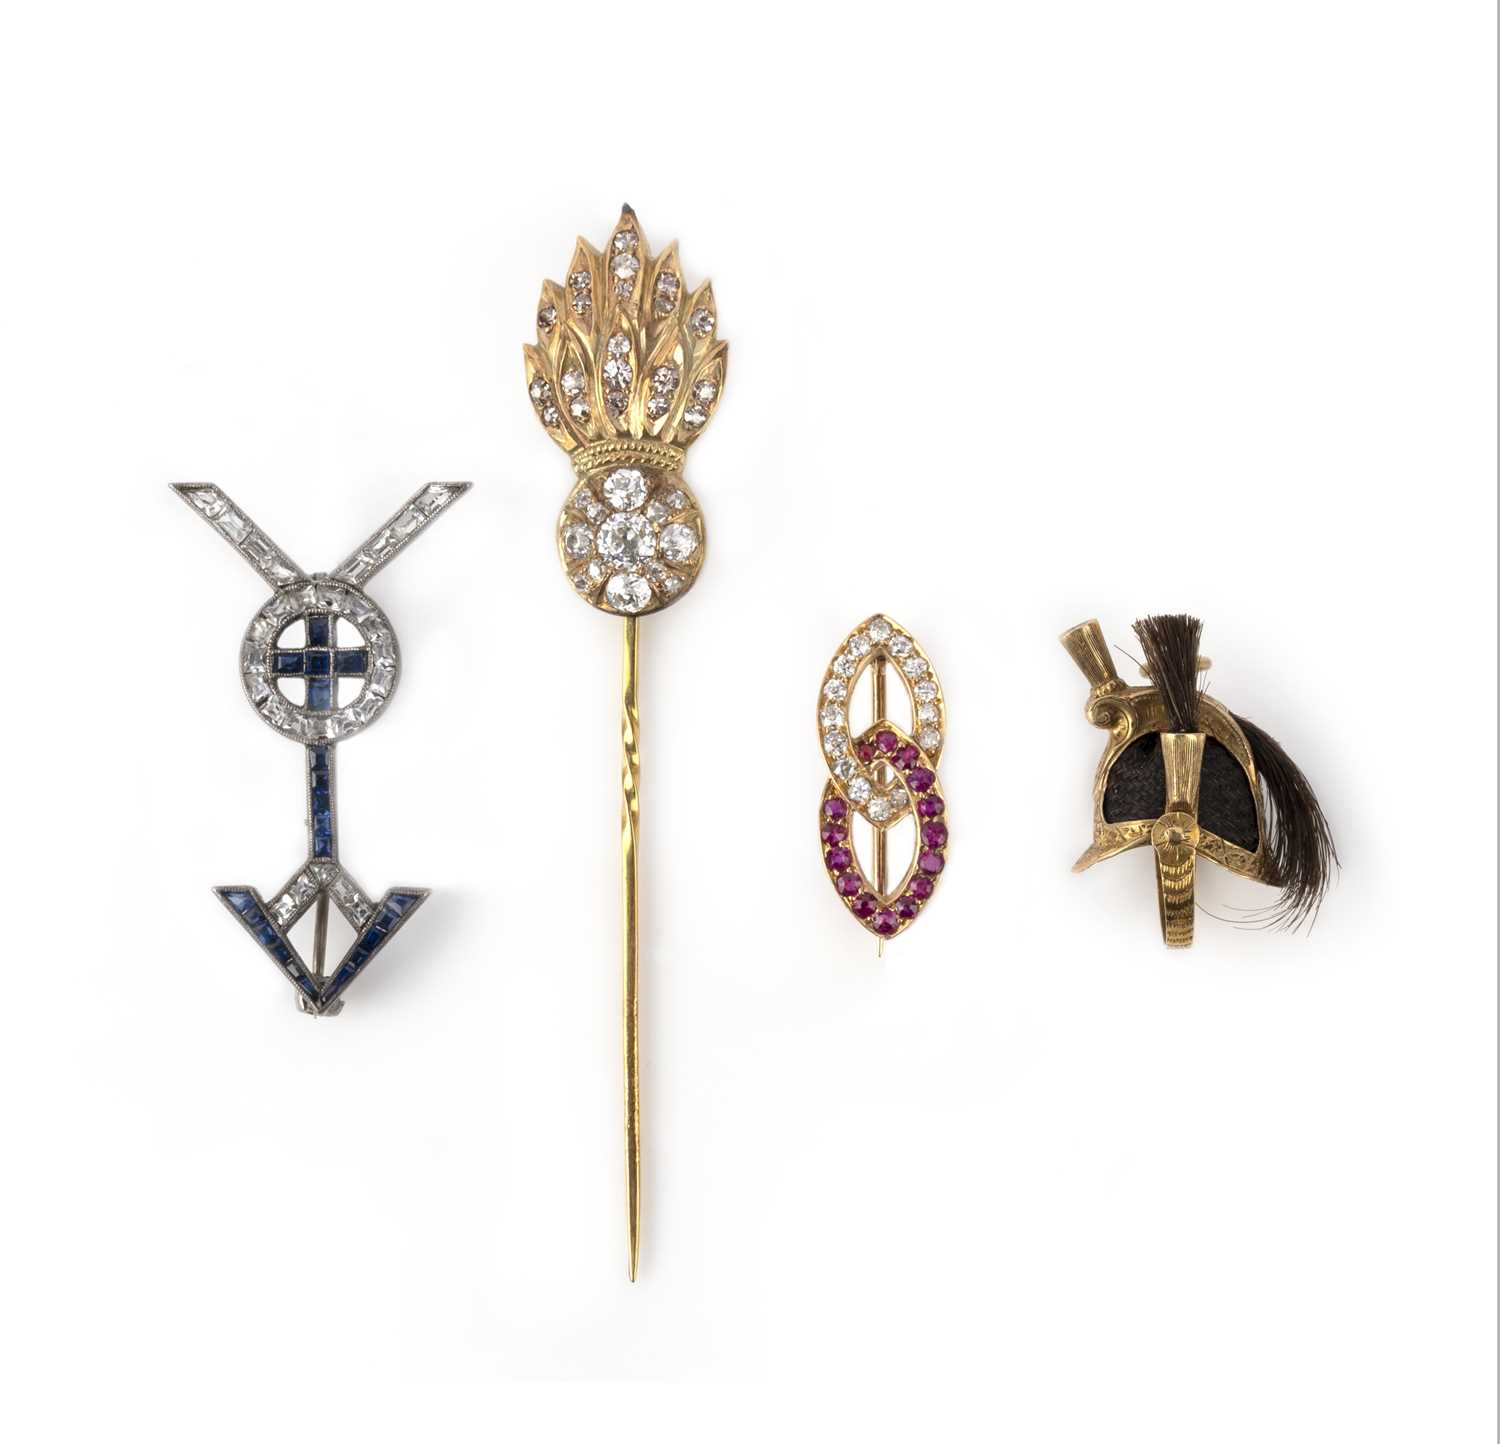 A collection of three brooches and a hairwork charm, late 19th/early 20th century, comprising: a